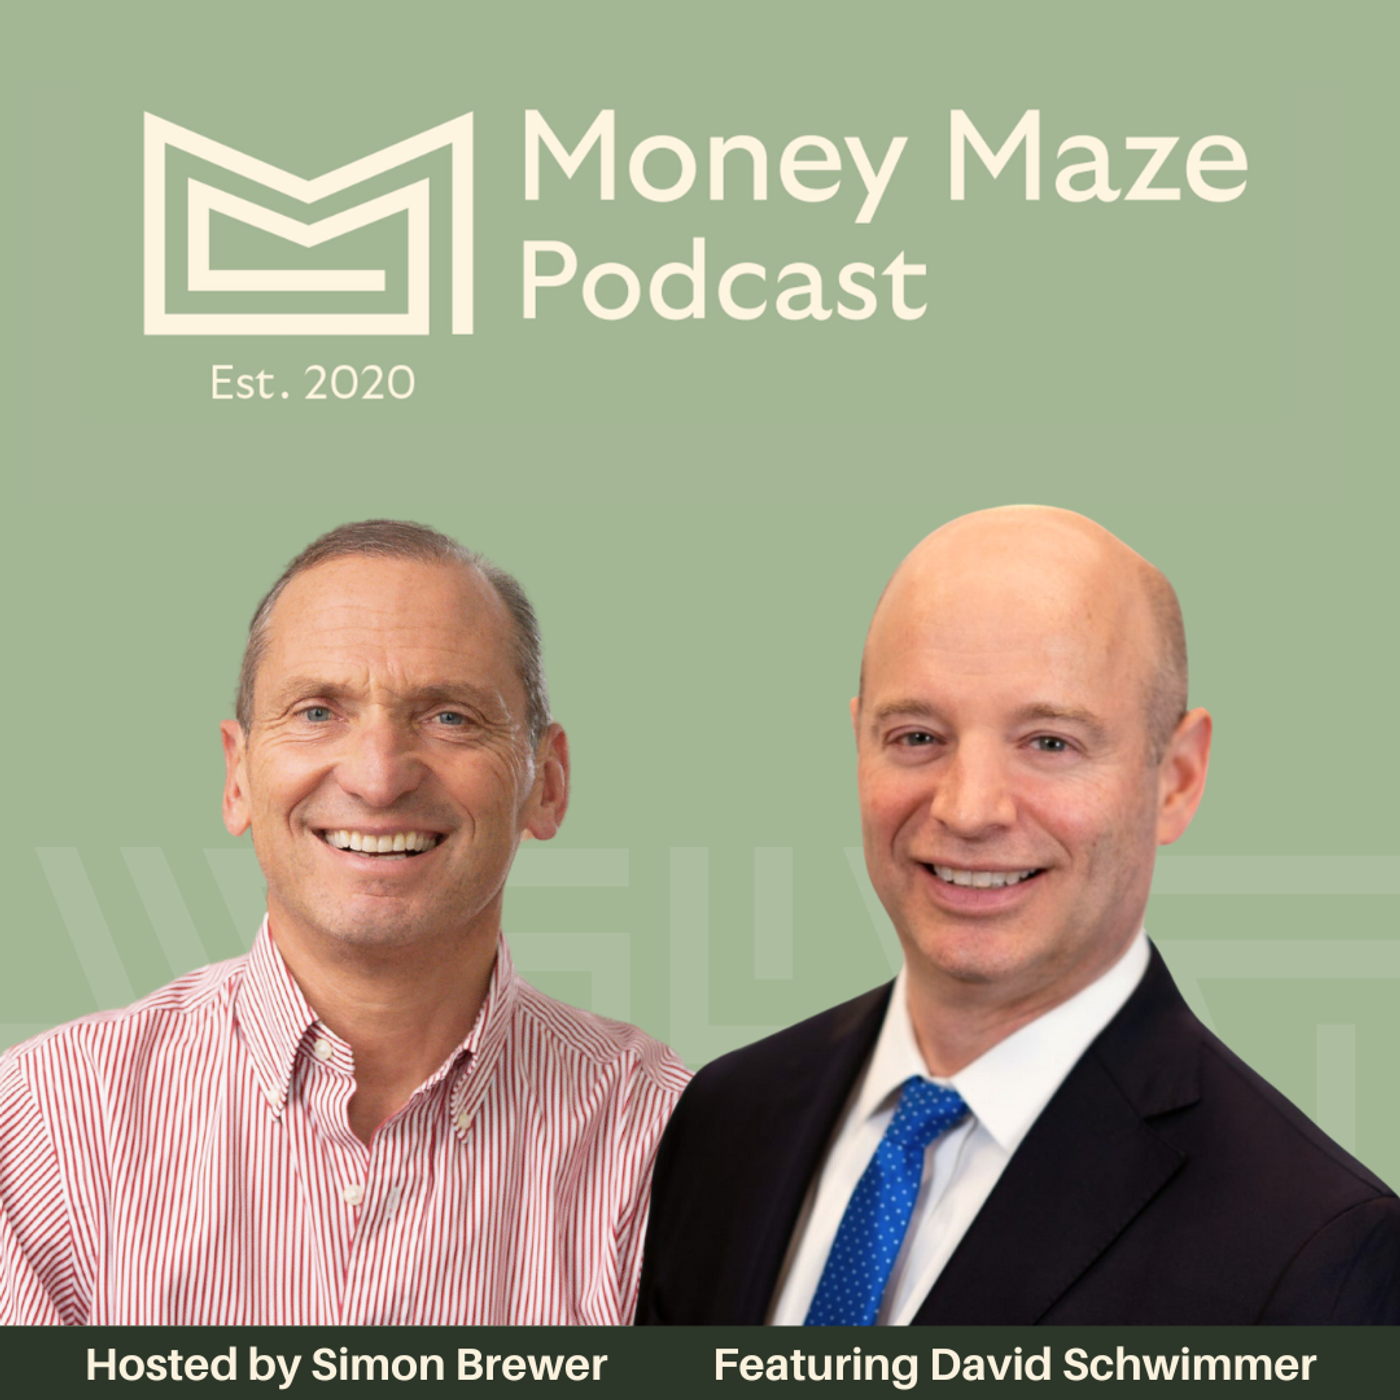 140: LSEG: Partnering with Microsoft and Why London Remains a Leading Financial Hub - With LSEG CEO, David Schwimmer